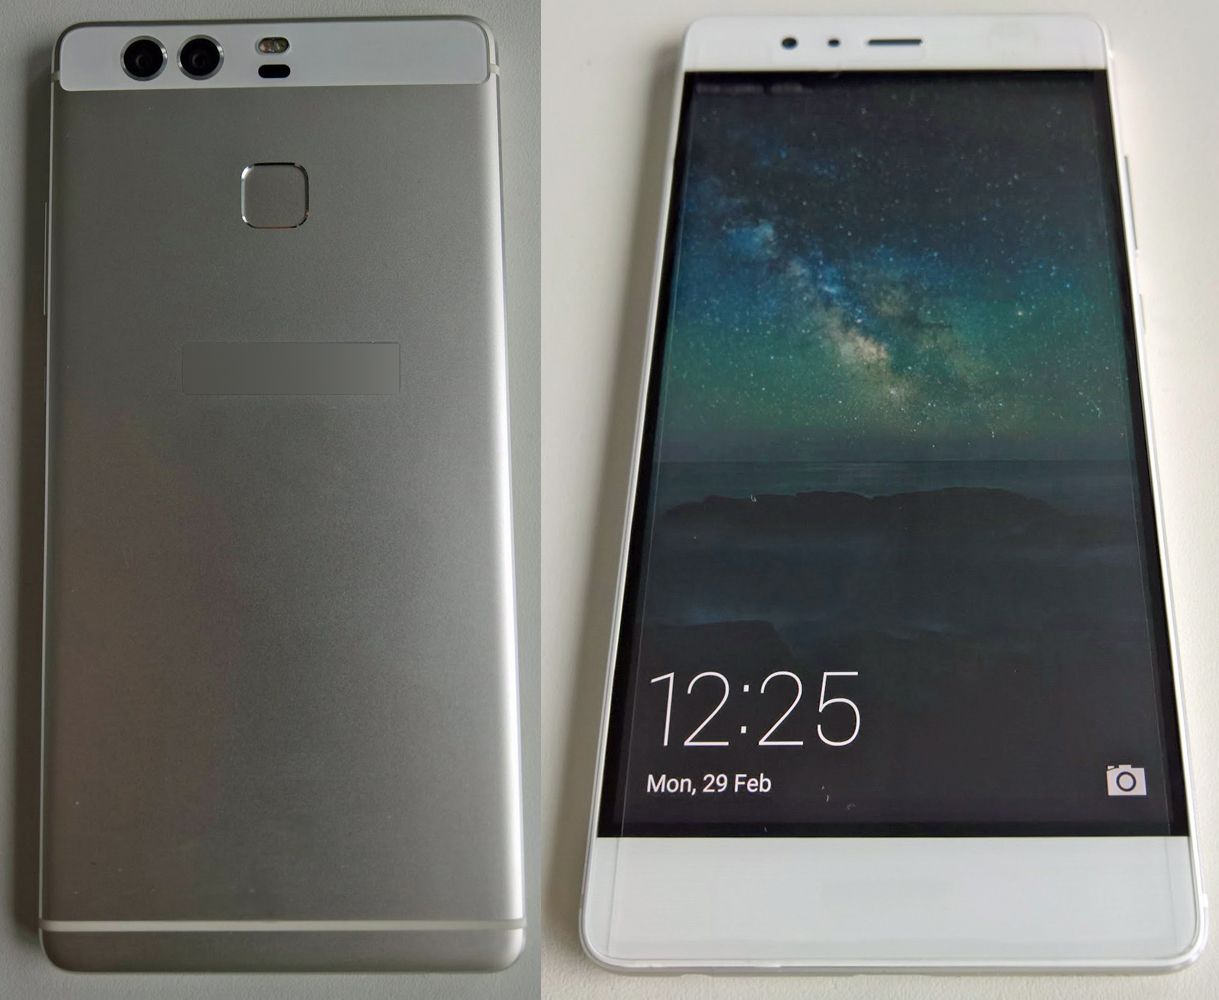 huawei p9 p9 max and p9 lite superb specs totally revealed in massive leak image 1